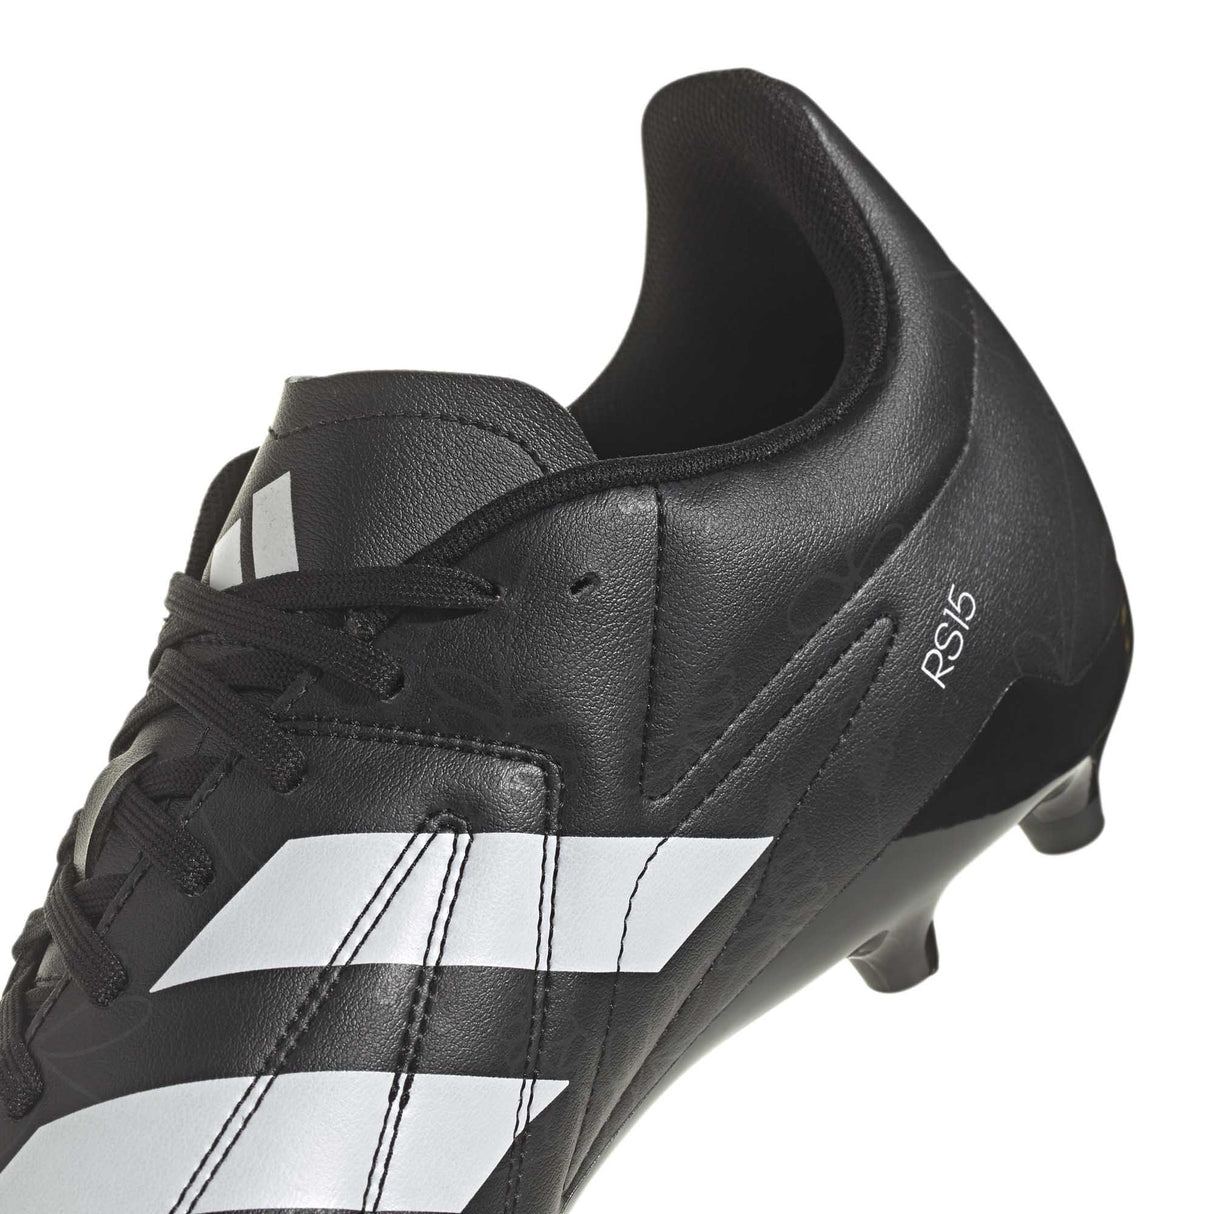 Adidas Adults RS-15 Rugby Boots - Firm Ground |Boots | Adidas | Absolute Rugby